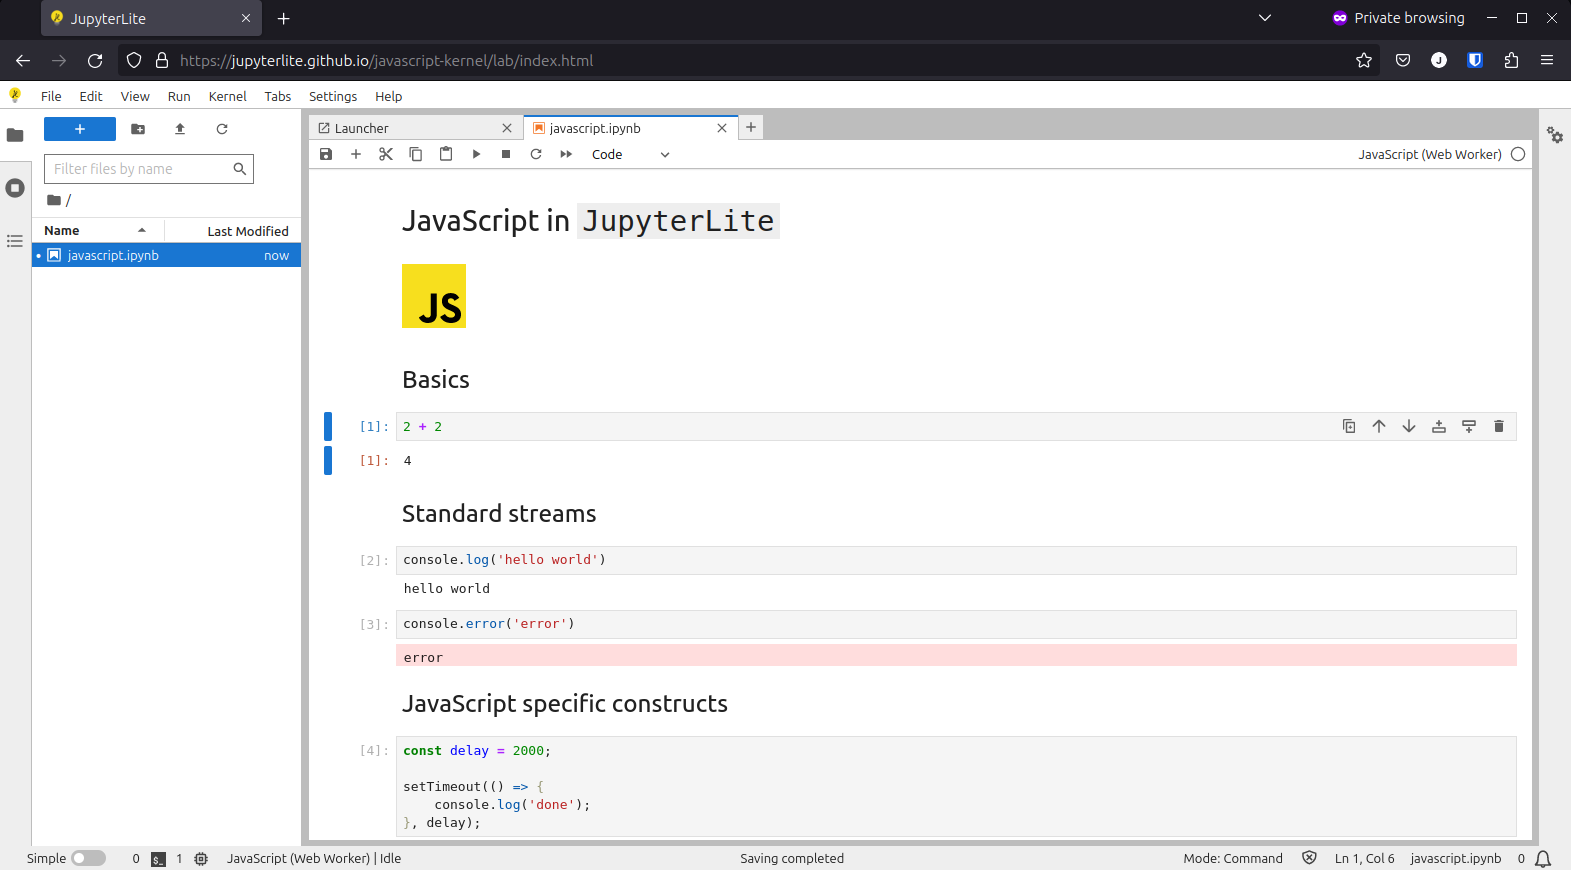 a screenshot showing a notebook with the JavaScript kernel in JupyterLite